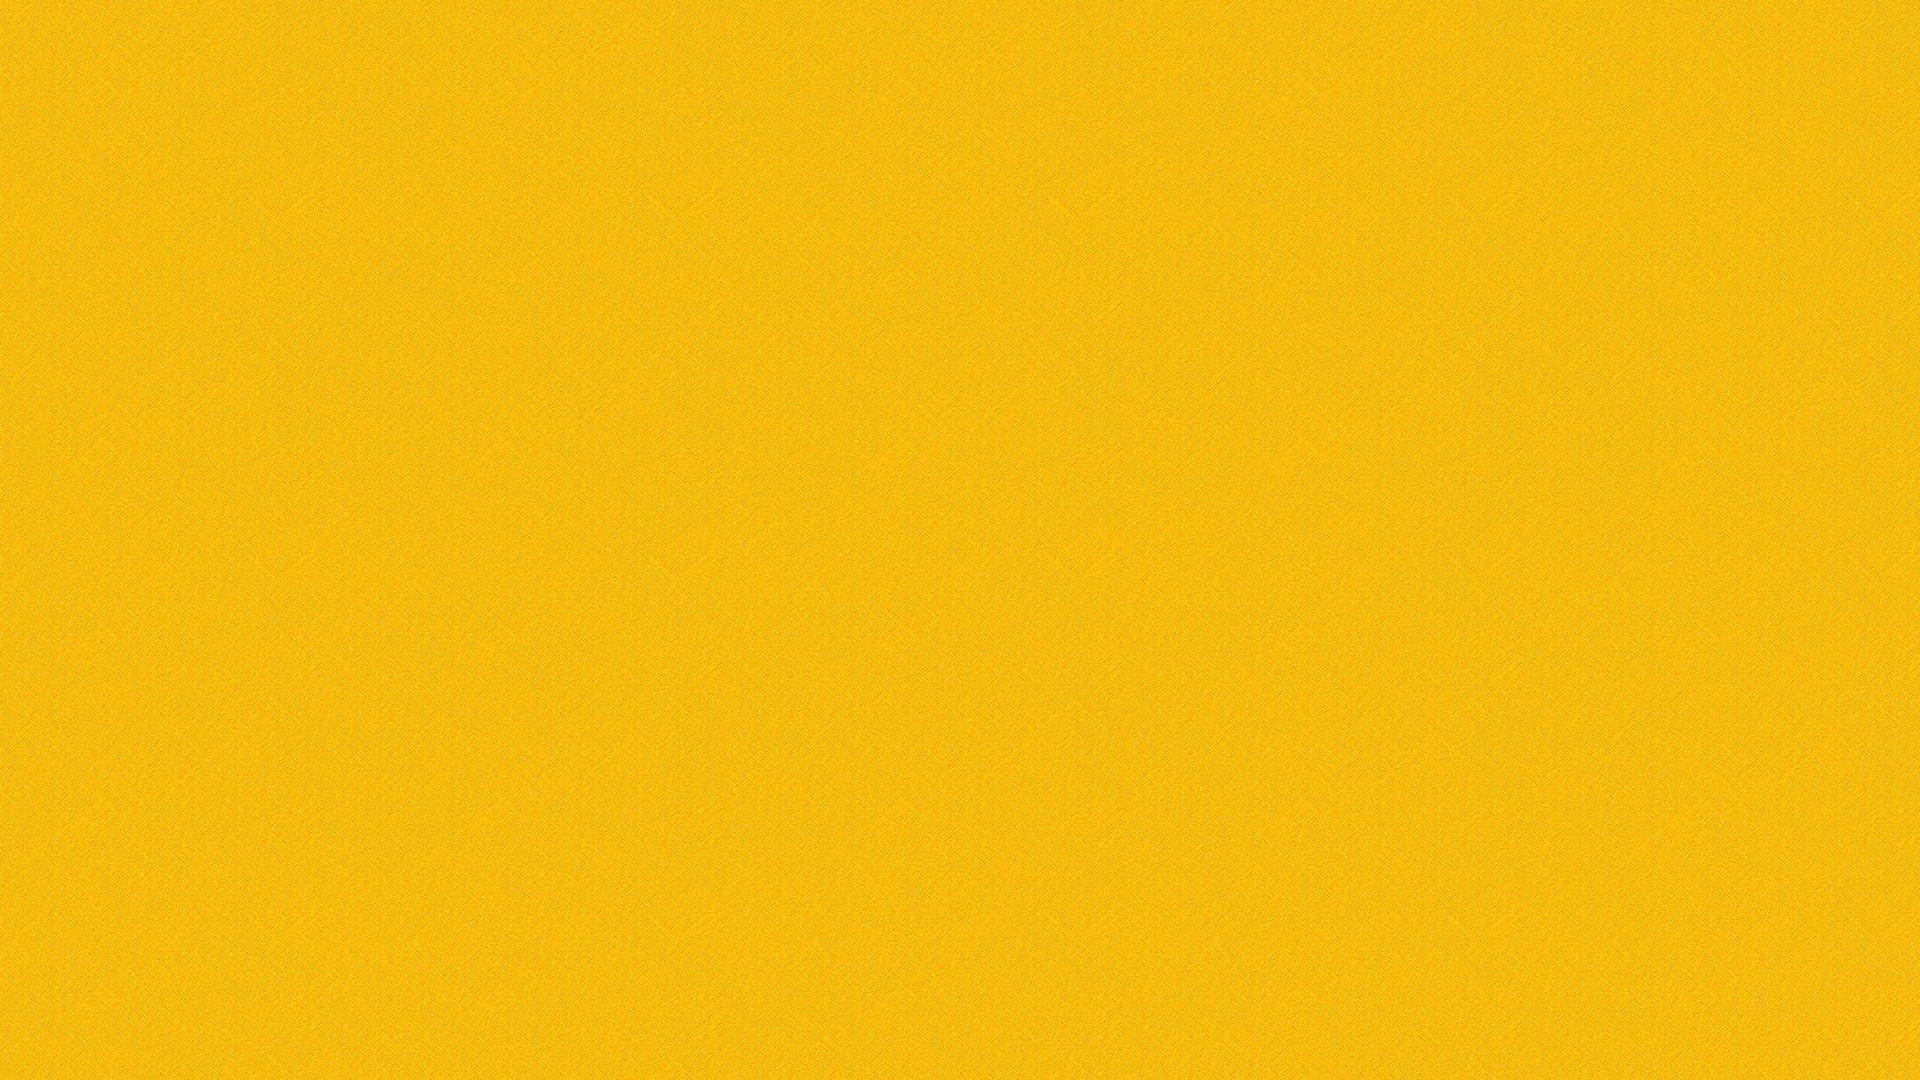 1920x1080 Wallpaper Blink - Best of Yellow Wallpapers HD for Android .